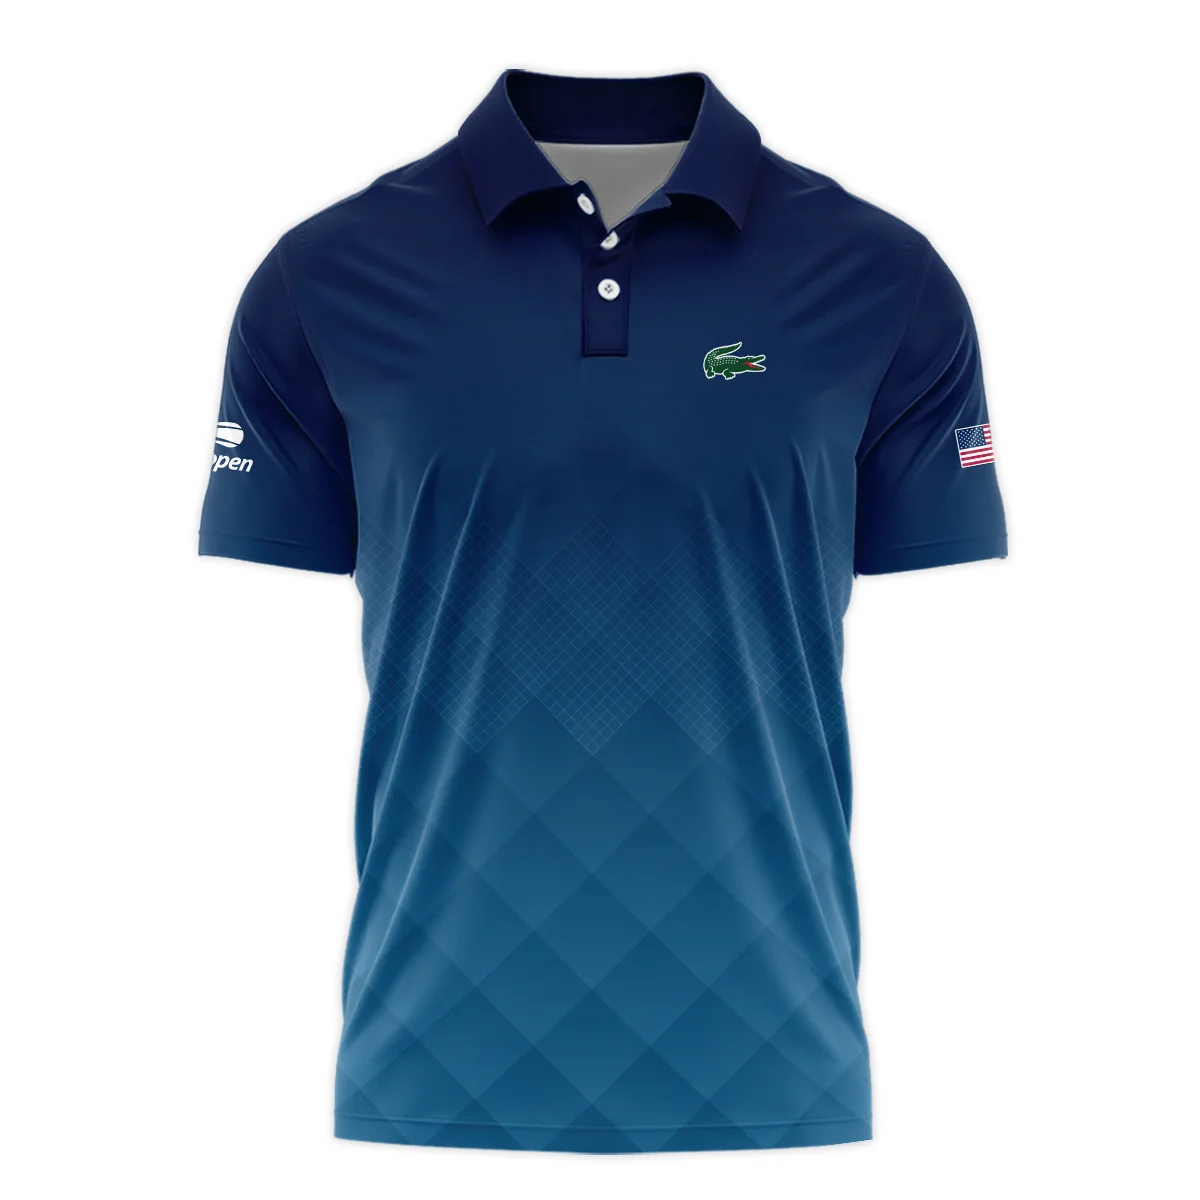 Lacoste Blue Abstract Background US Open Tennis Champions Polo Shirt Style Classic Polo Shirt For Men